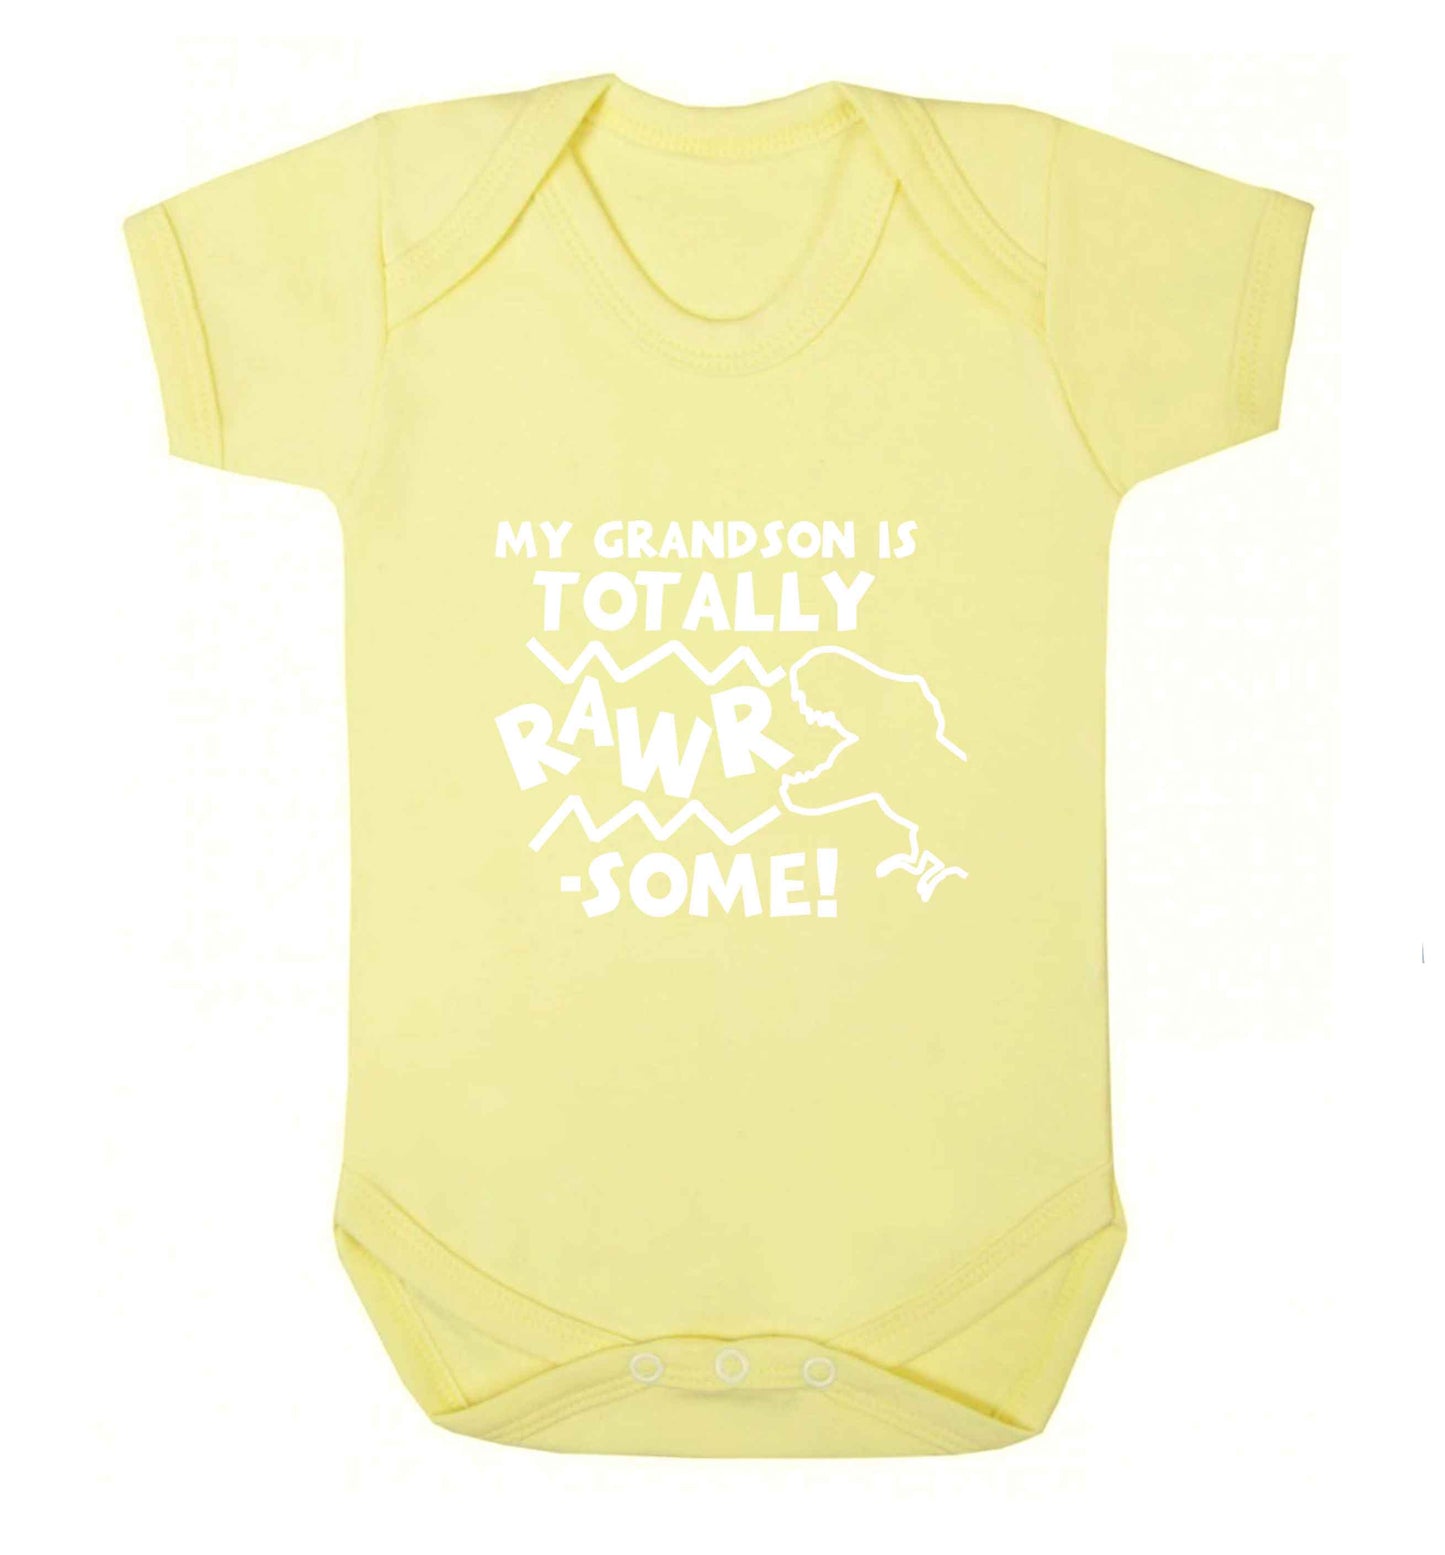 My grandson is totally rawrsome baby vest pale yellow 18-24 months